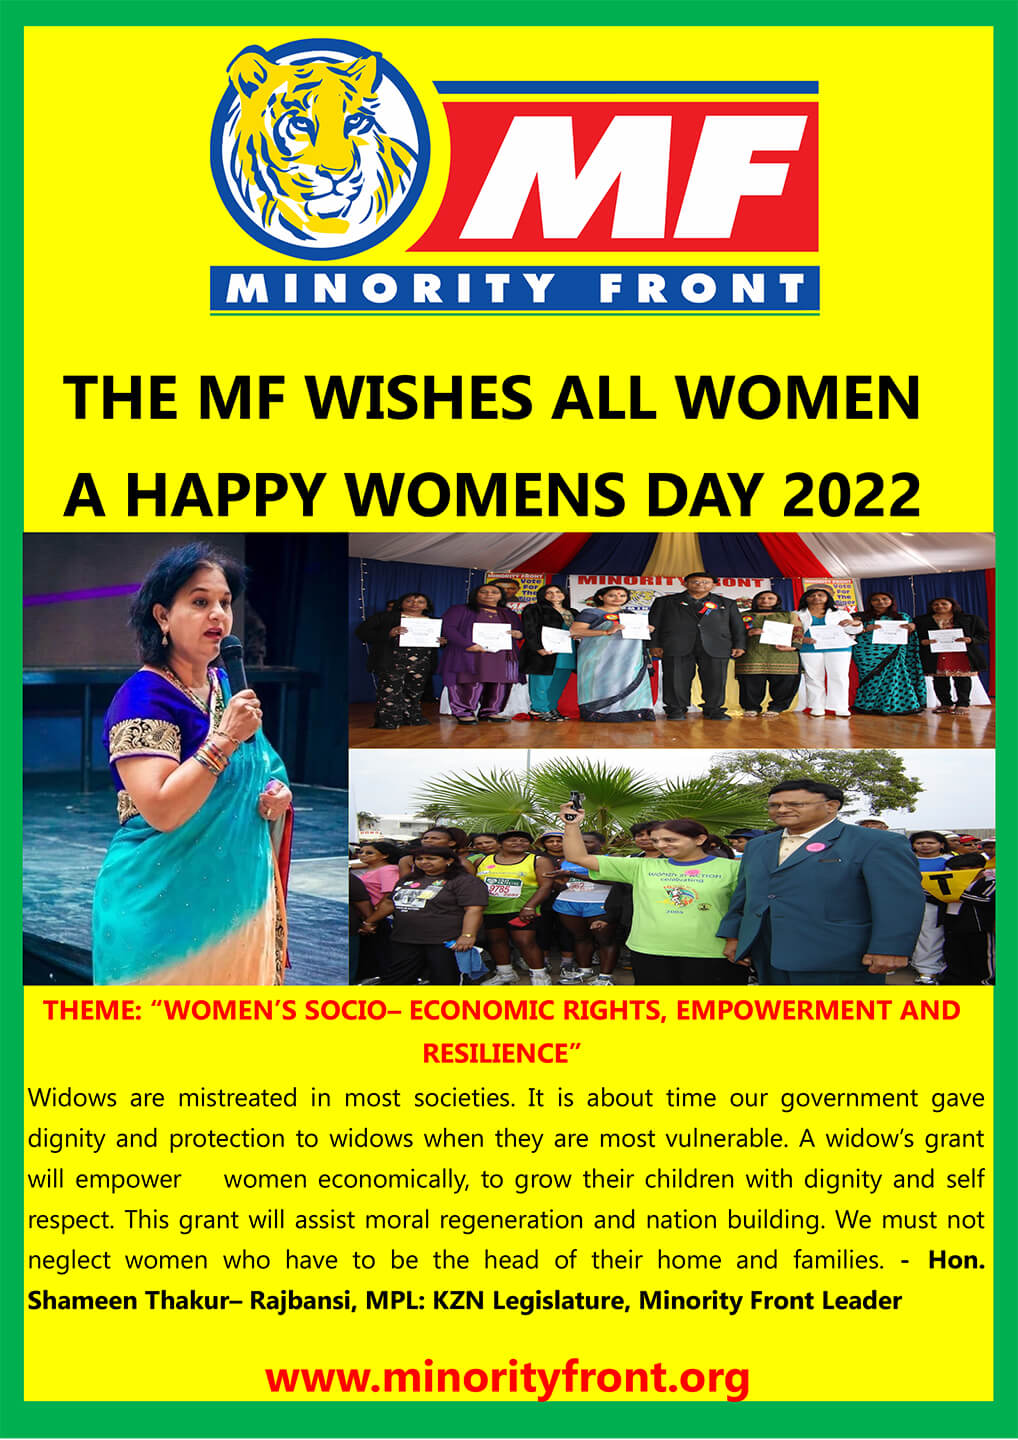 The MF Wishes All Women a Happy Women’s Day 2022